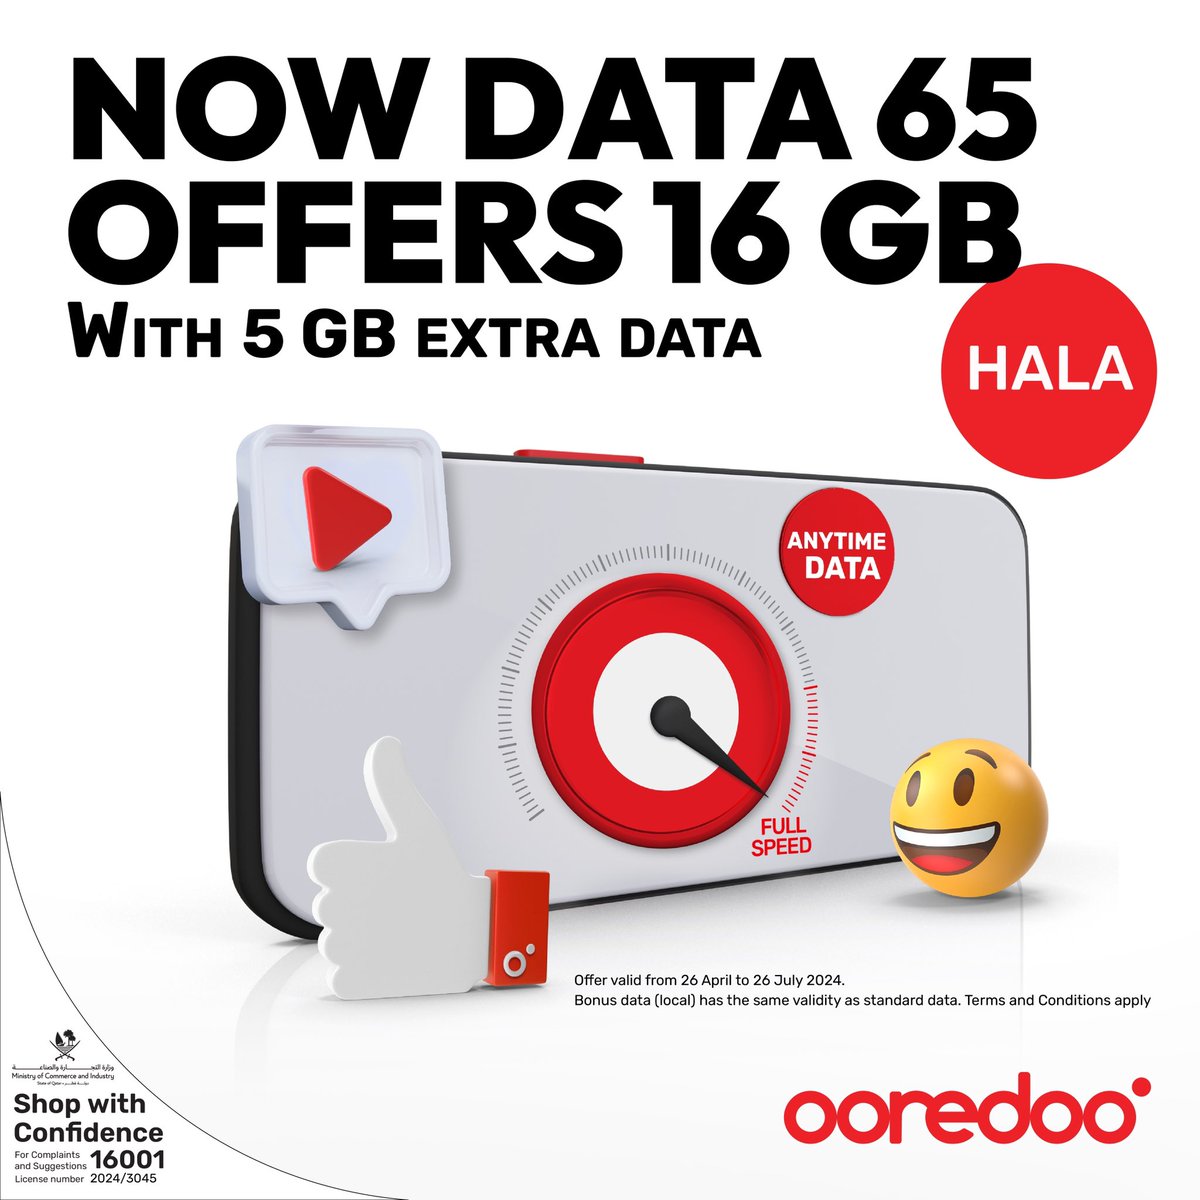 🔴 More Data, More Fun! Hala Data 65 keeps you covered for 28 days with 16GB of data. Recharge now on the Ooredoo App. T&Cs apply. #UpgradeYourWorld #Ooredoo